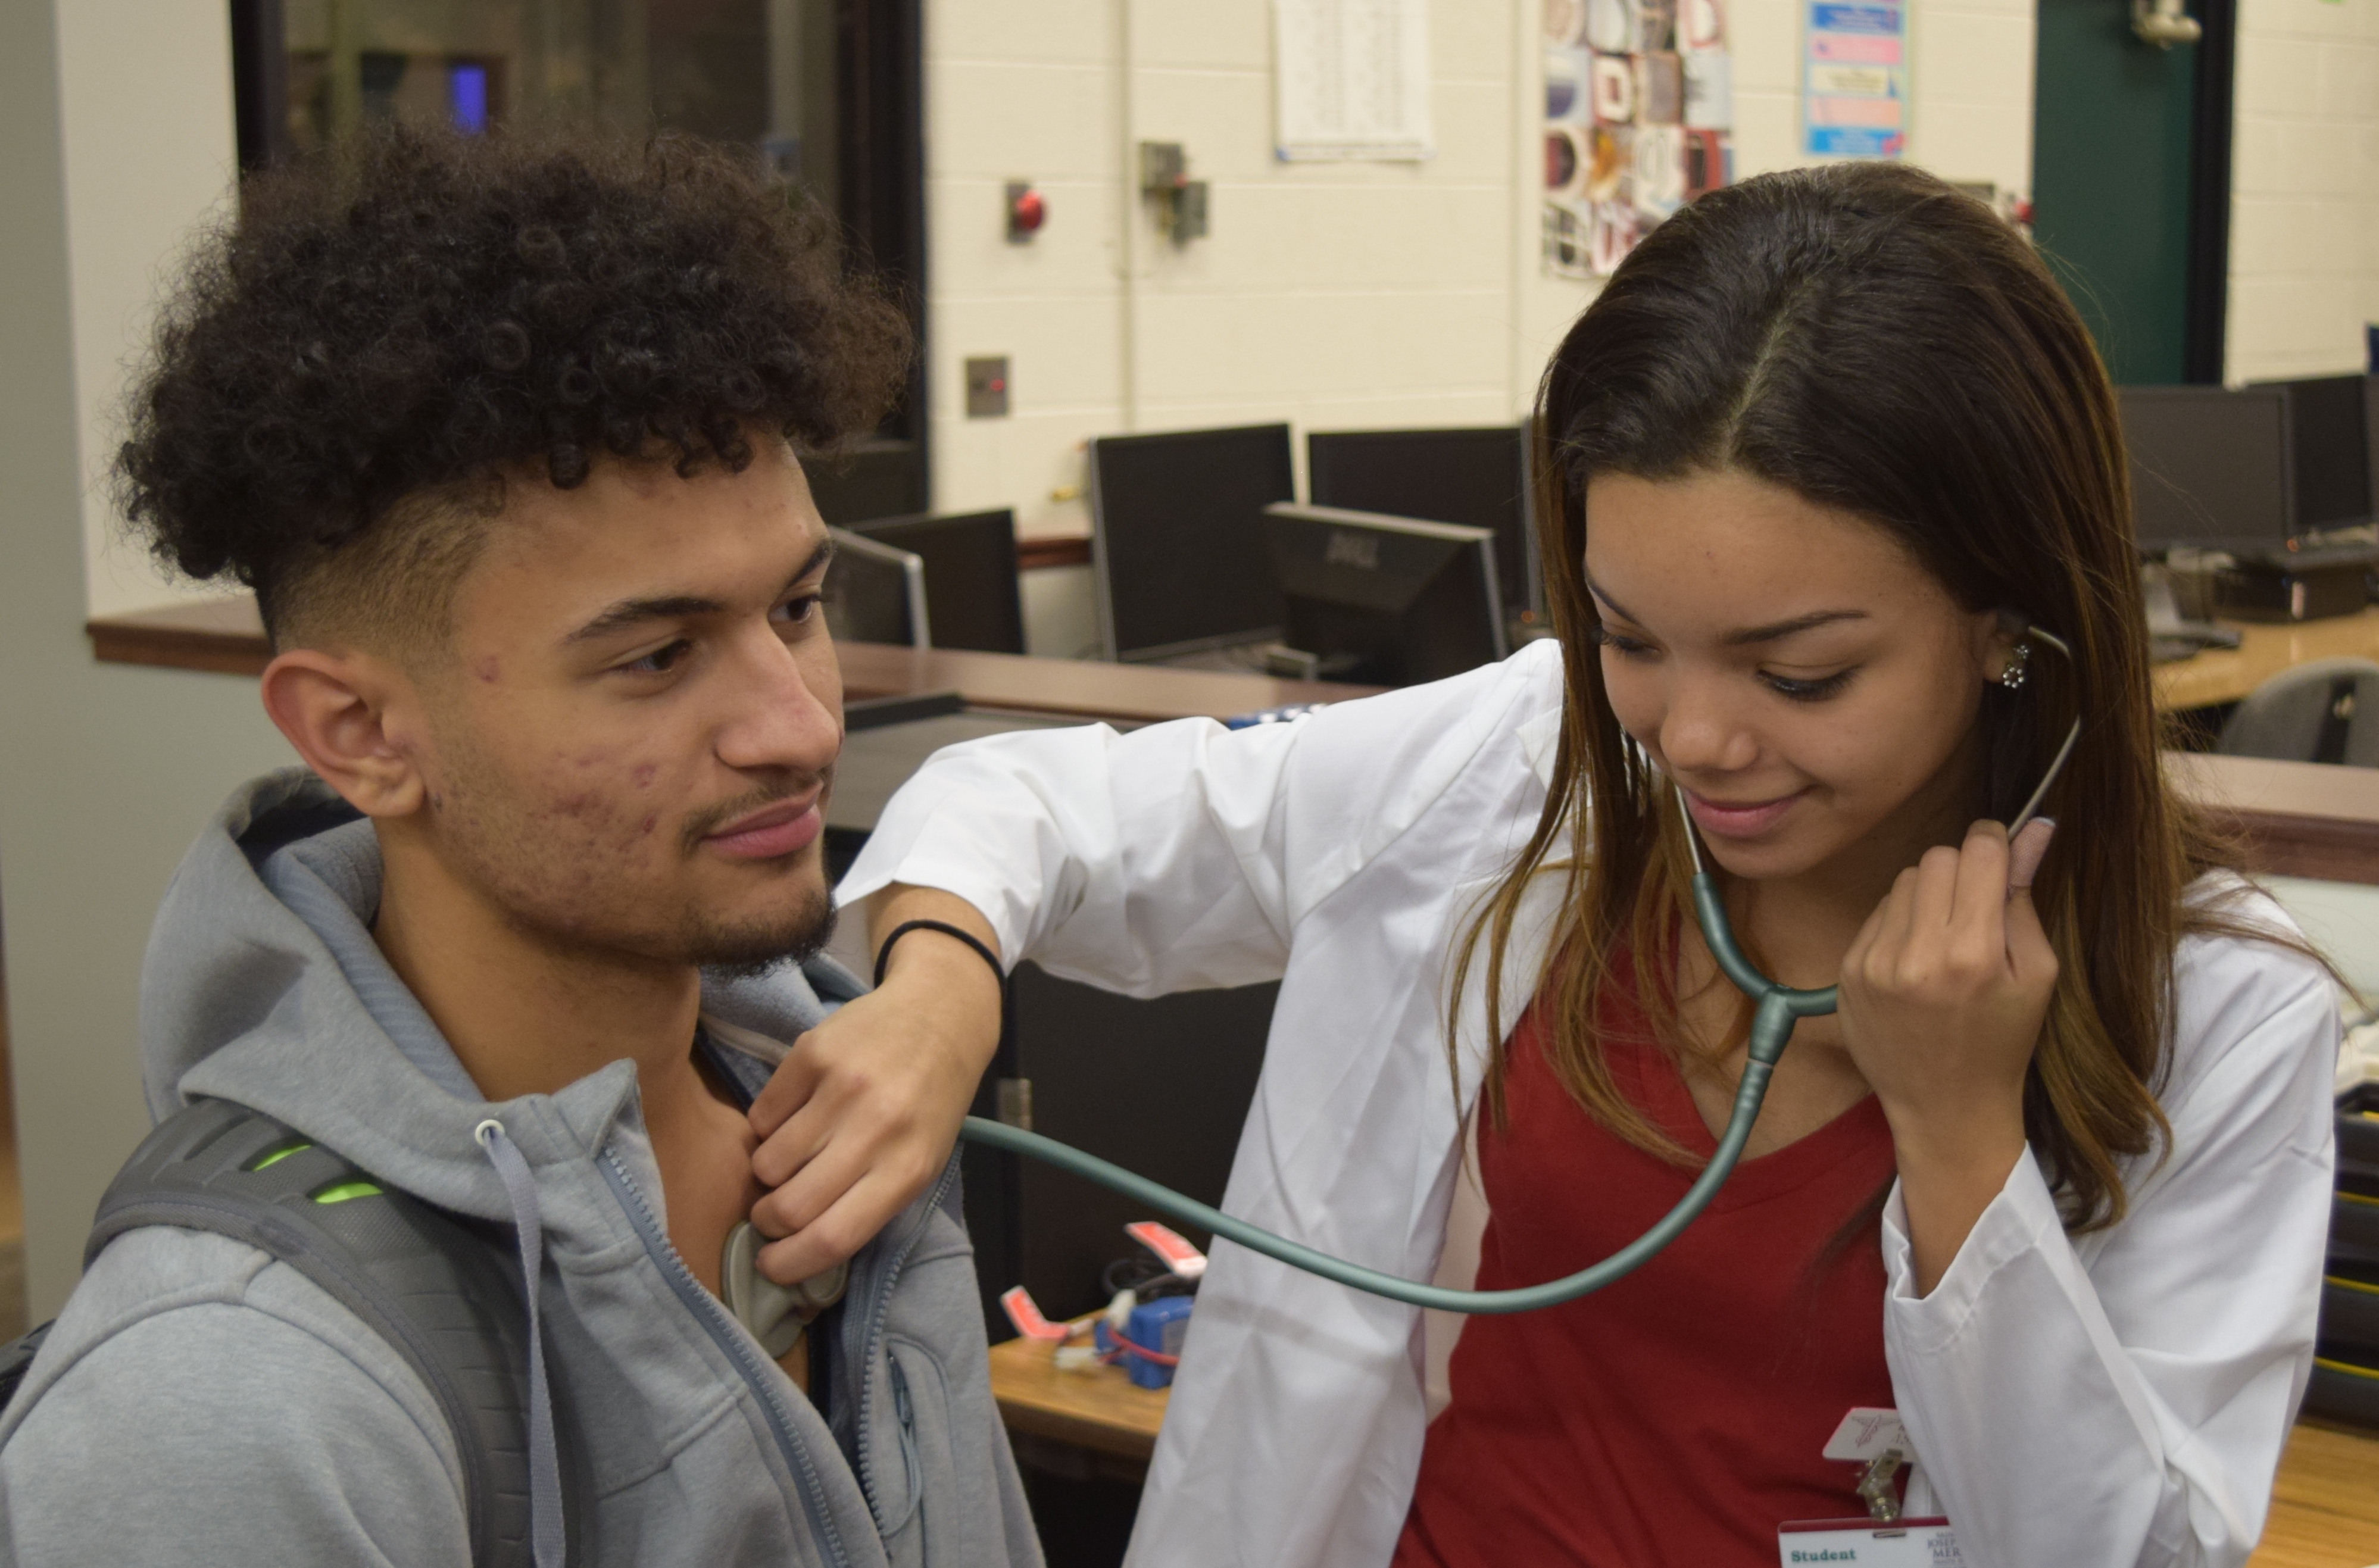 A female student with a stethoscope checks the heart beat of a male student.